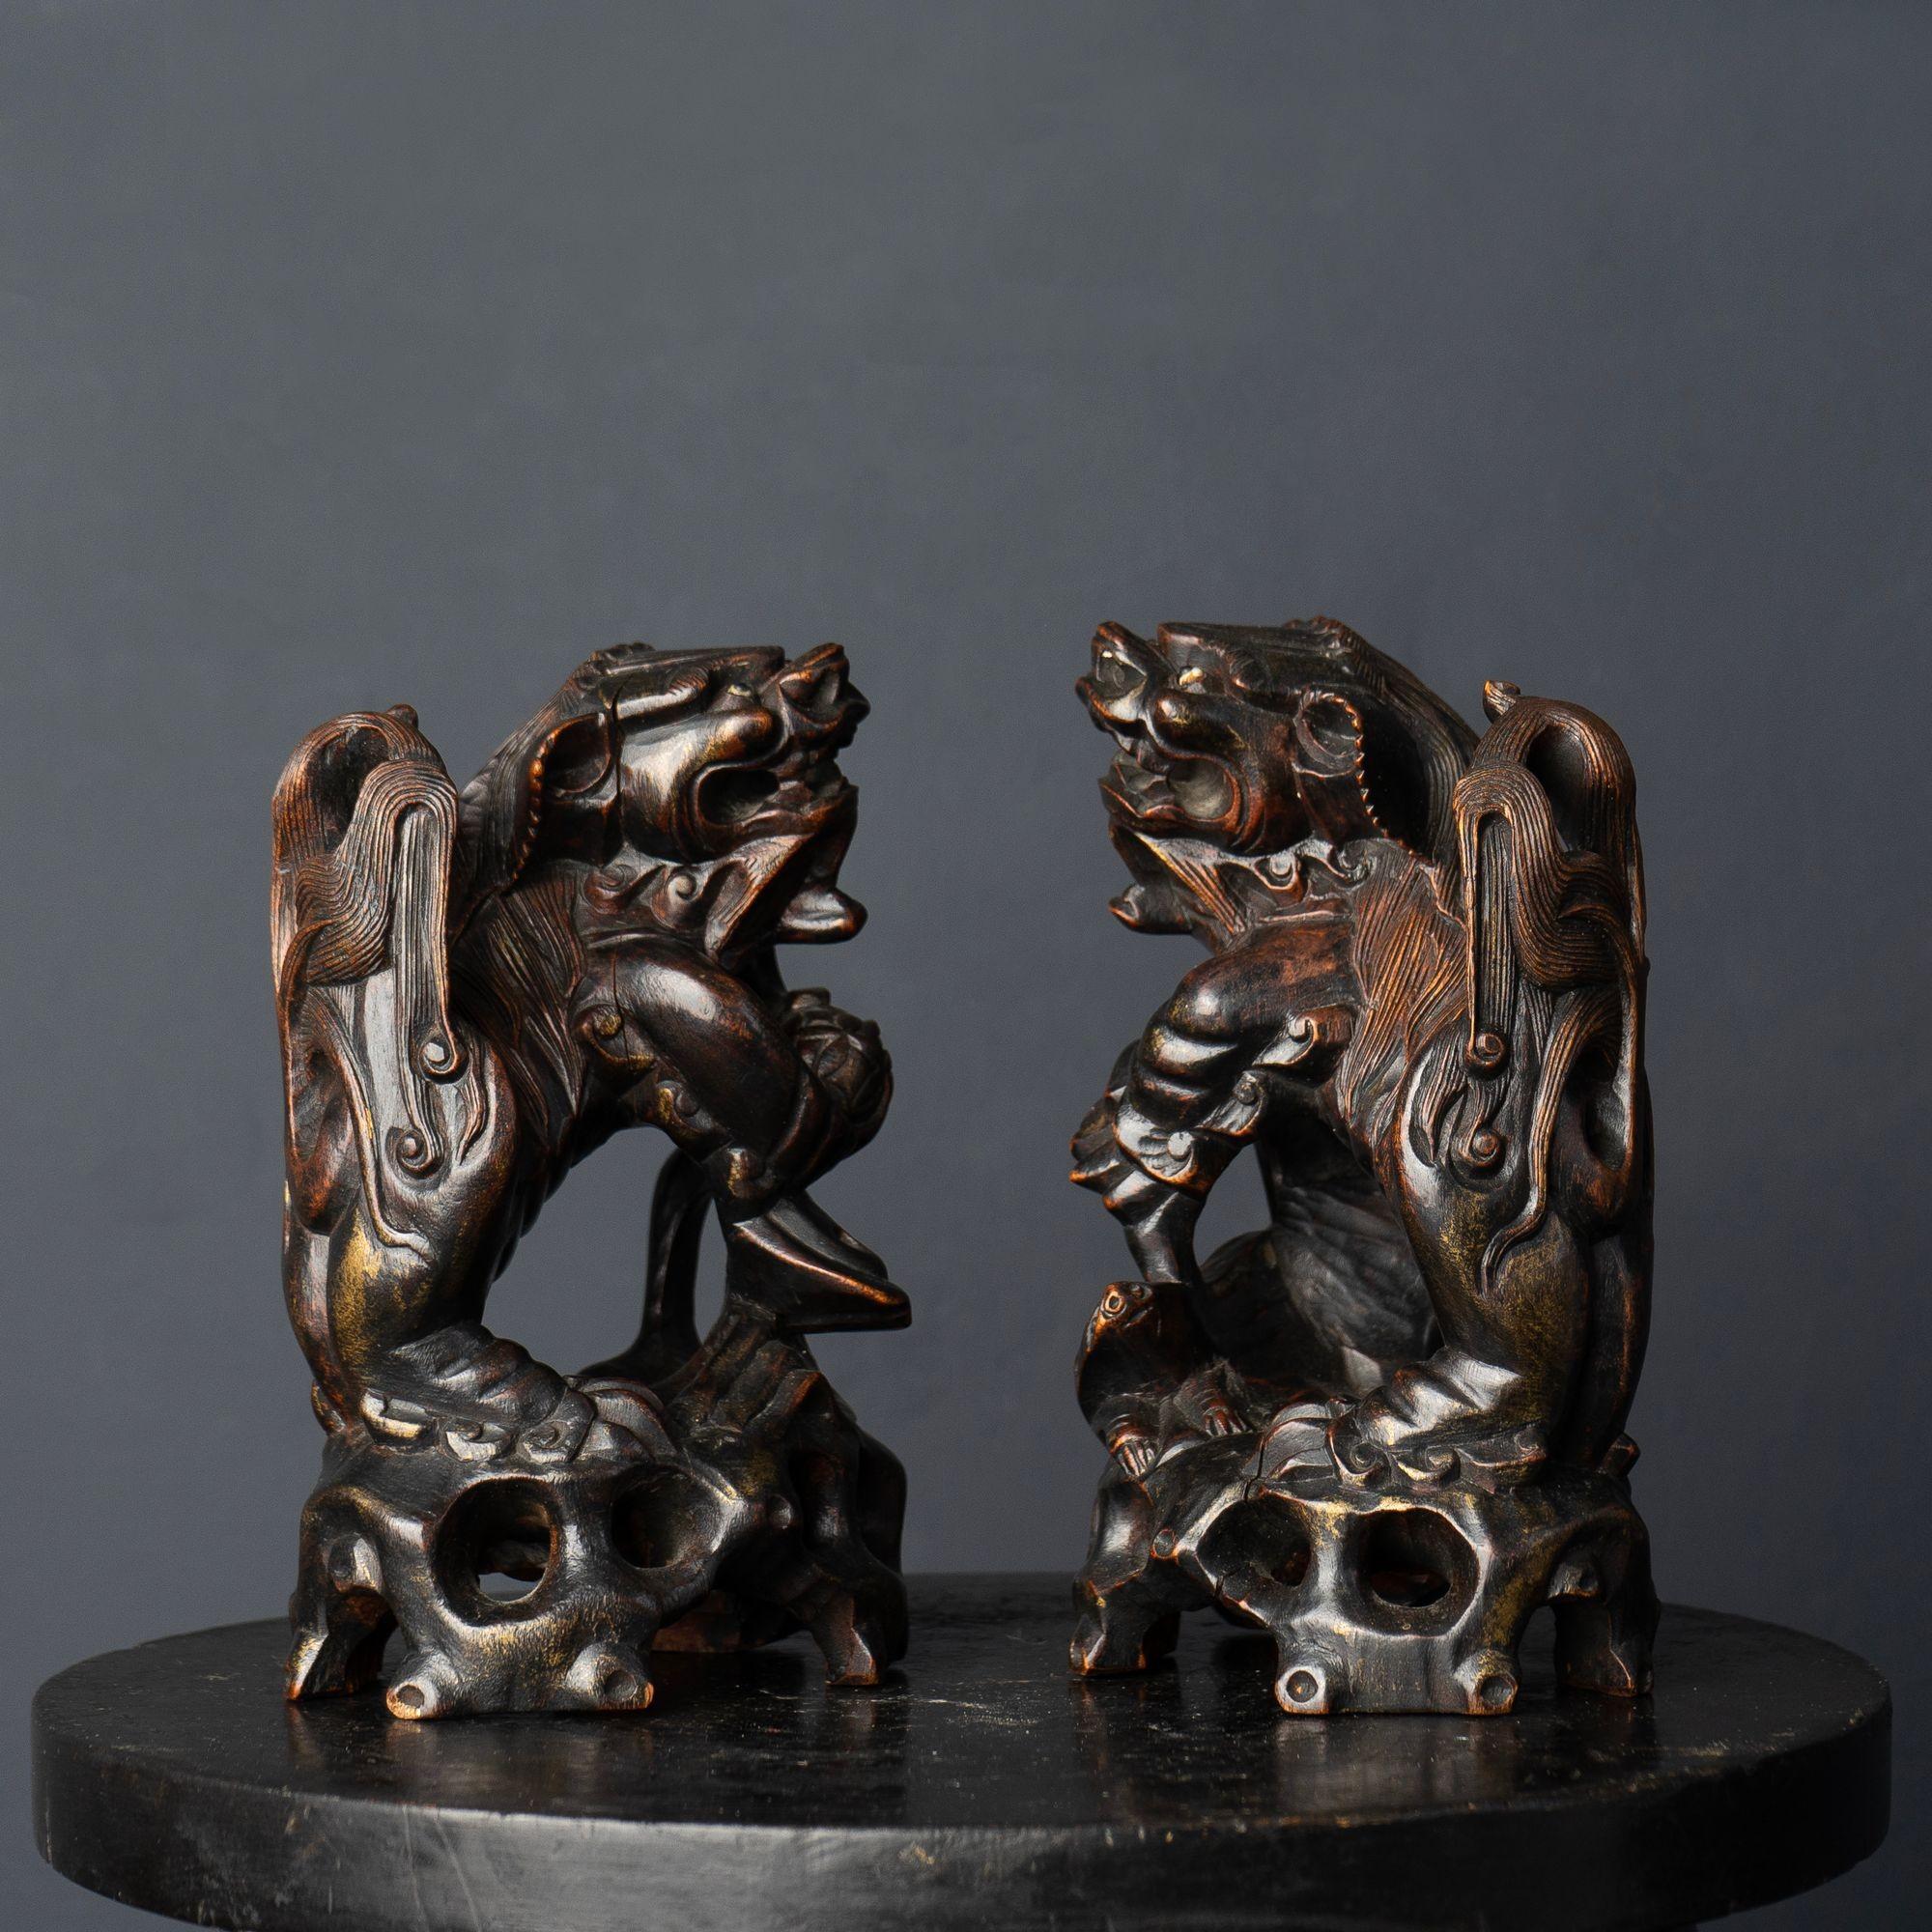 Hand-Carved Pair of Antique Chinese Carved Wooden Foo Dogs or Guardian Lion Statues, Qing